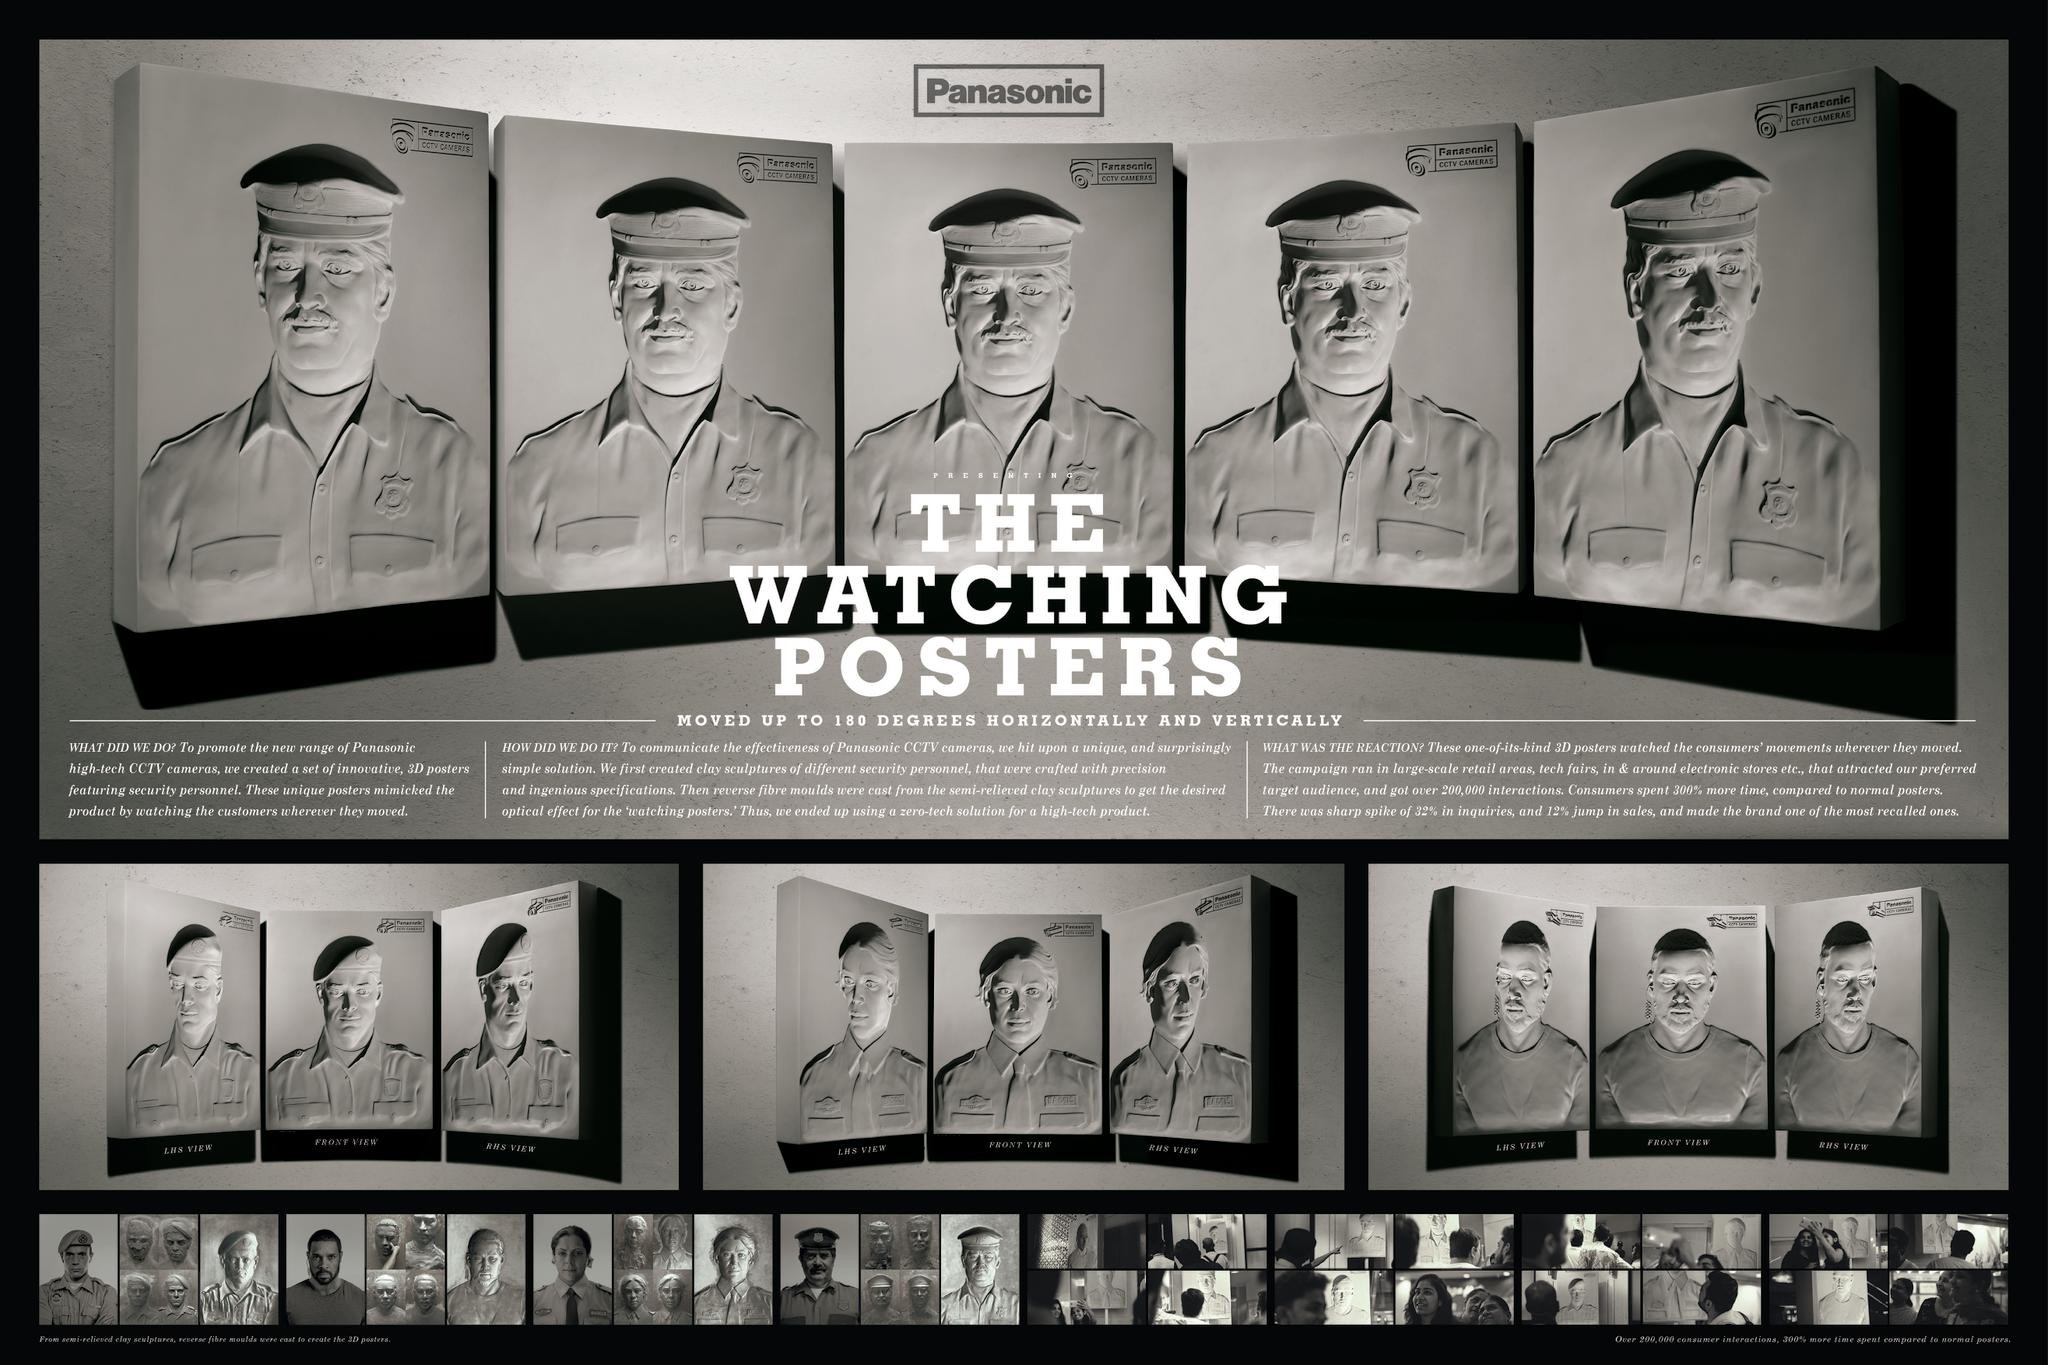 THE WATCHING POSTERS